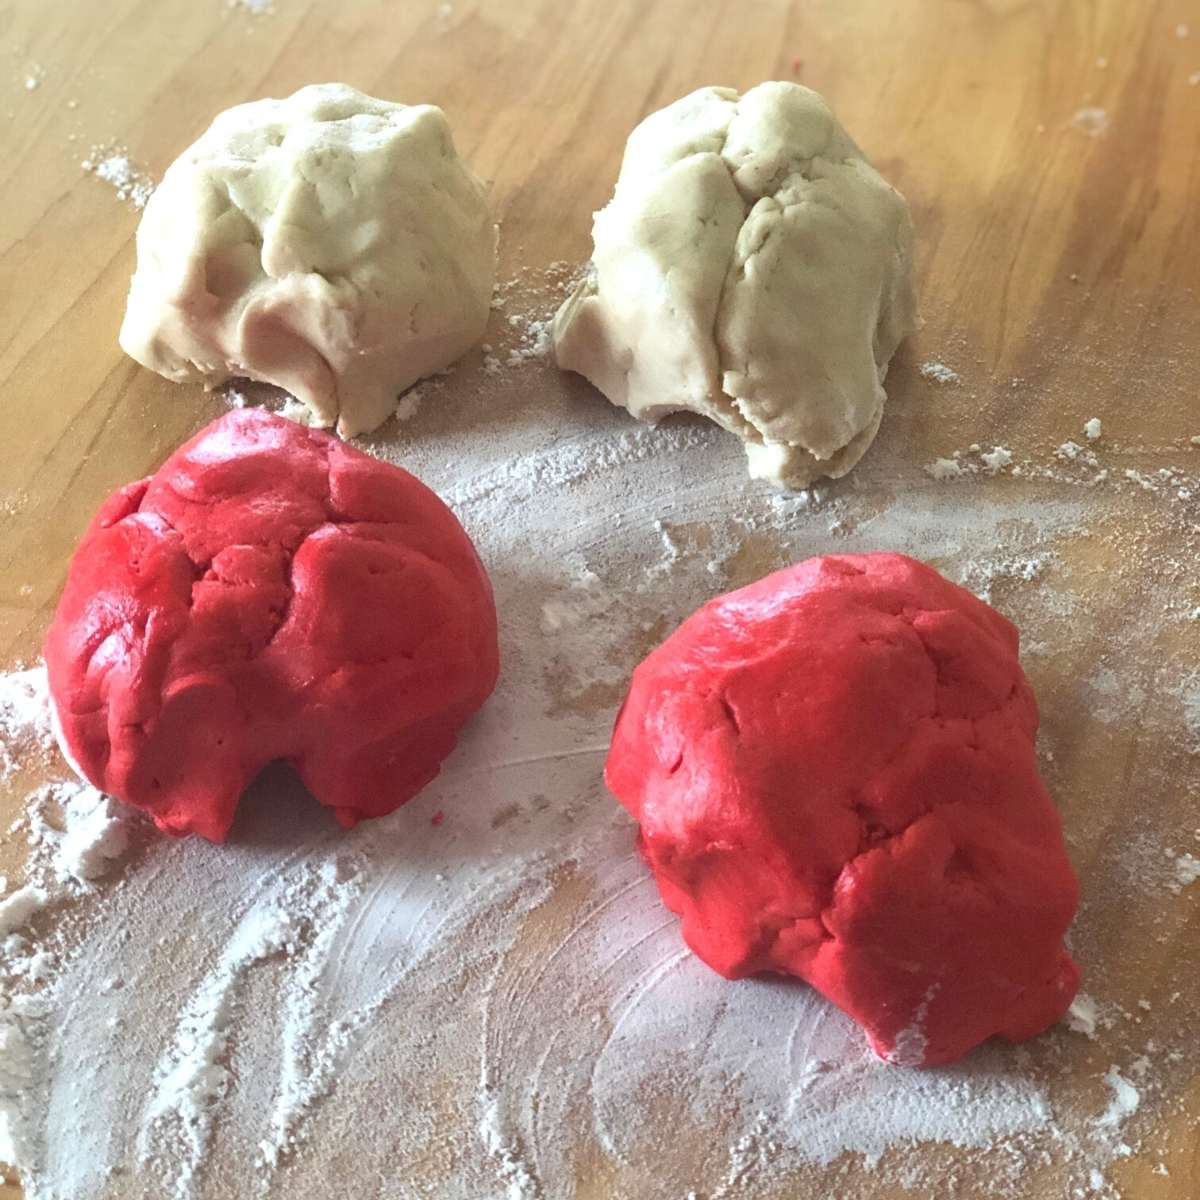 Balls of red and white dough